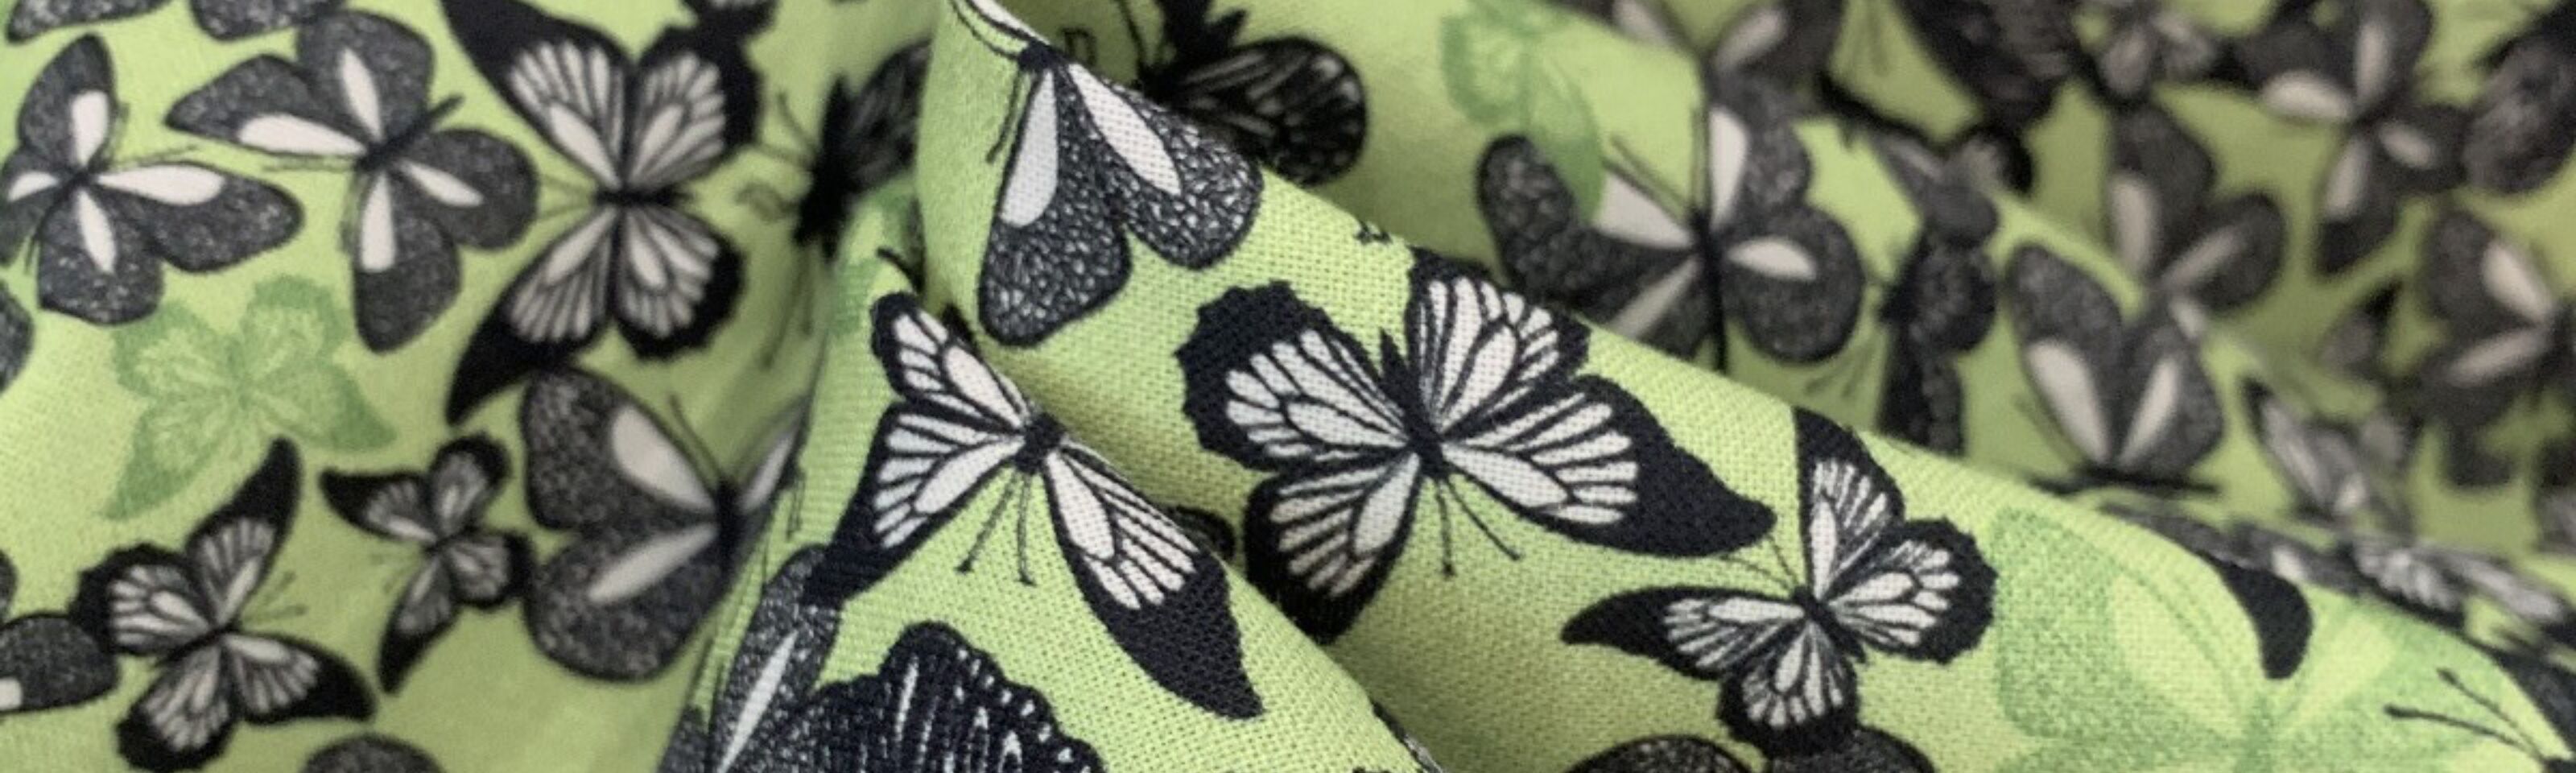 Stof Craft - Butterfly Garden - Japanese Craft Cotton Fabric - Black, White, Mint, Lime Green - Fold